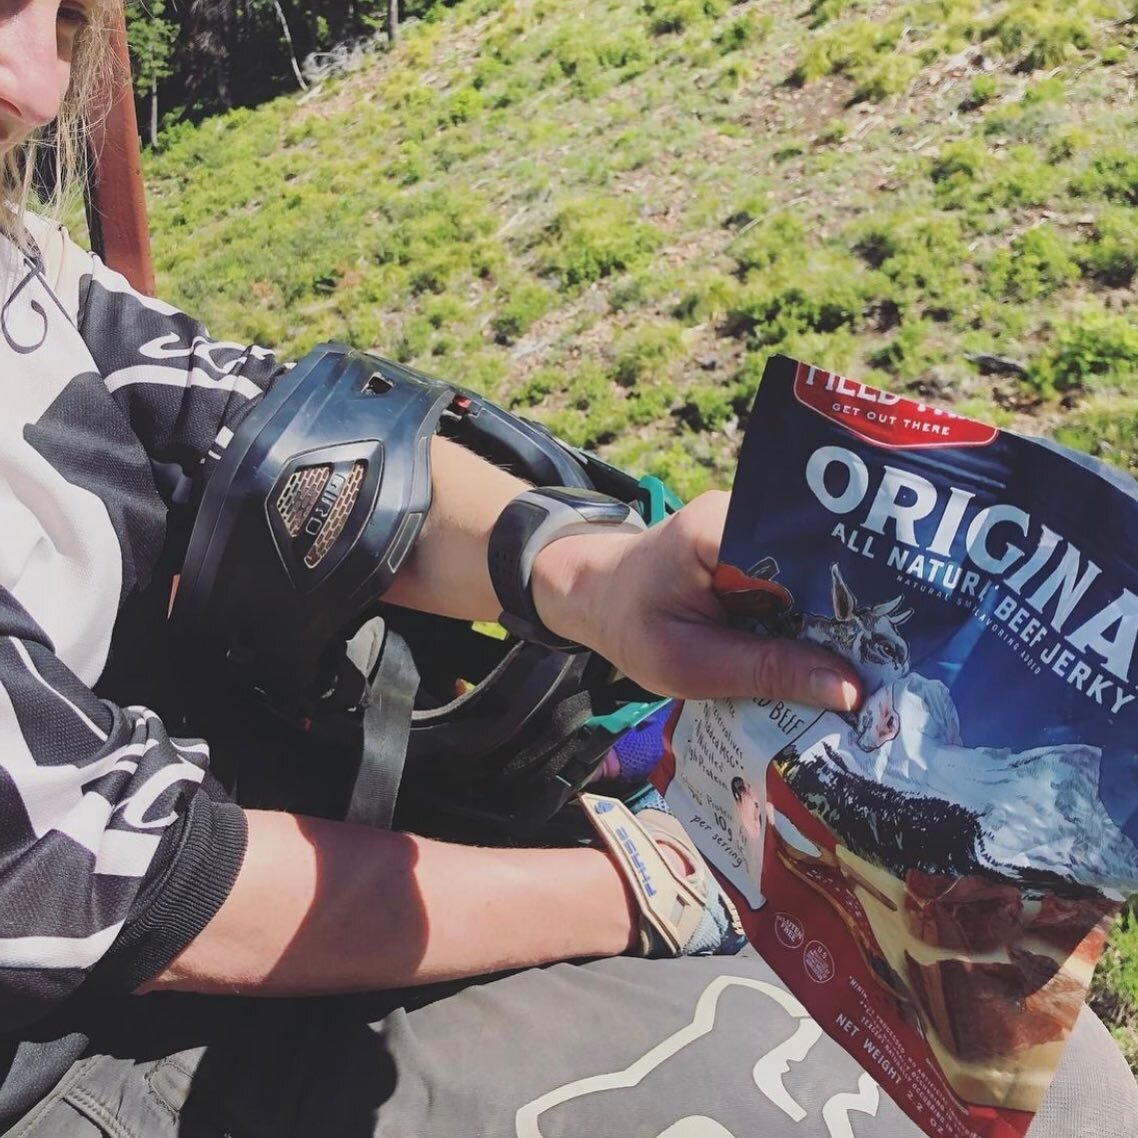 Do more of what you love and feel great while doing it! Our jerky is the perfect on-the-go snack!💪

📸 @go_fast_yulia 

#beefjerky #jerky #beef #foodie #snack #food #jerkytime #jerkylove #keto #protein #travel #snacks #beefjerkytime #glutenfree #mea